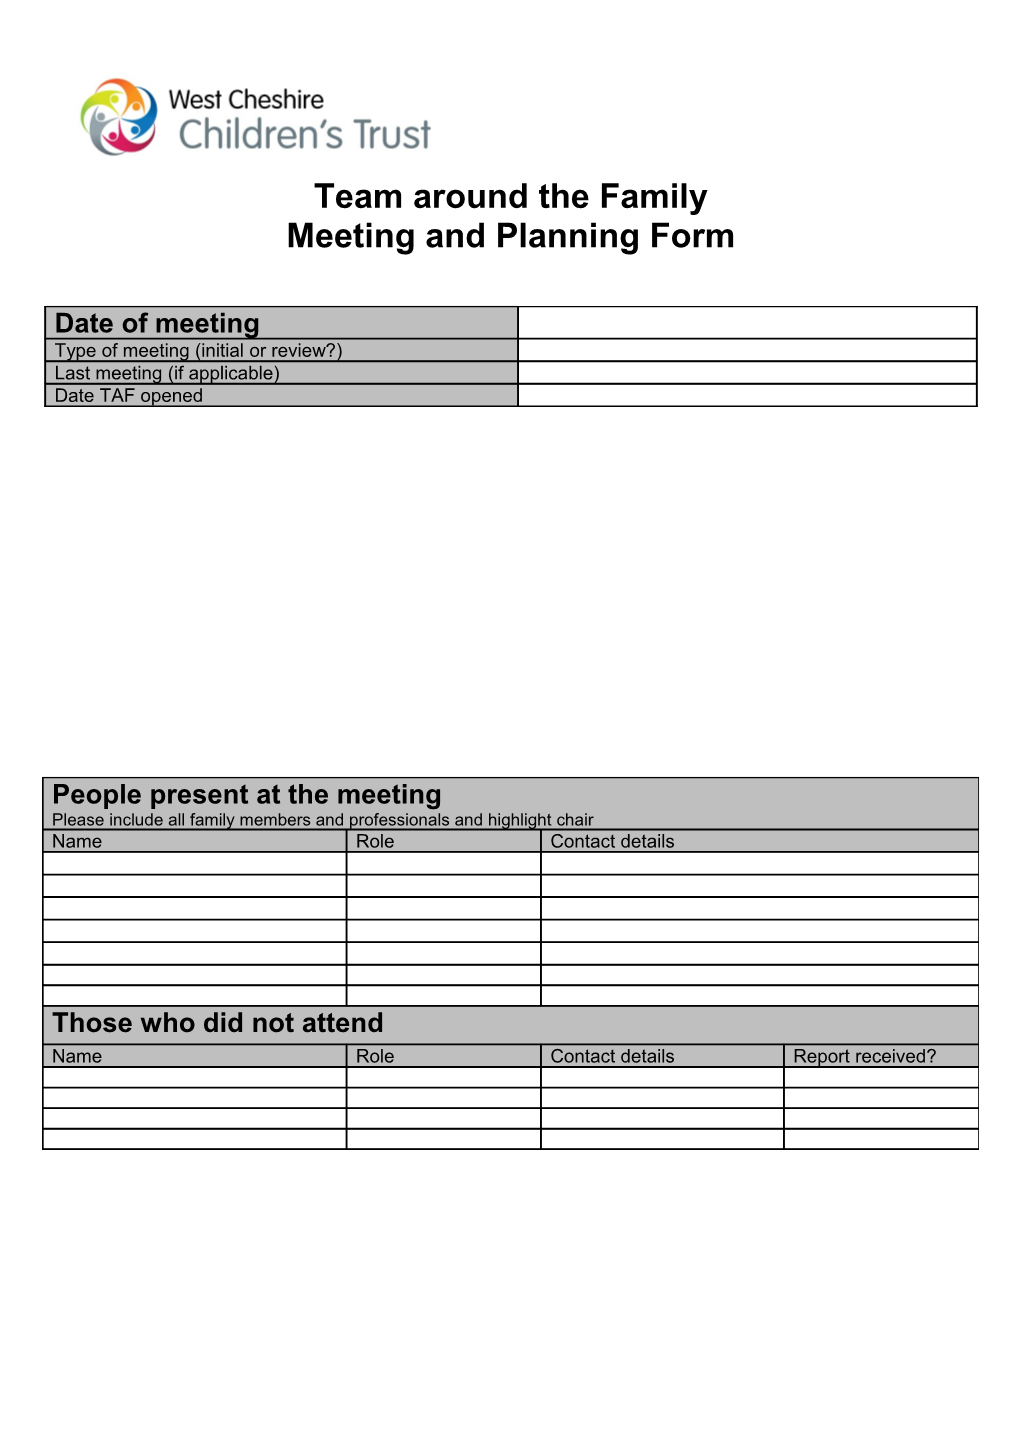 Team Around the Family Meeting and Planning Form